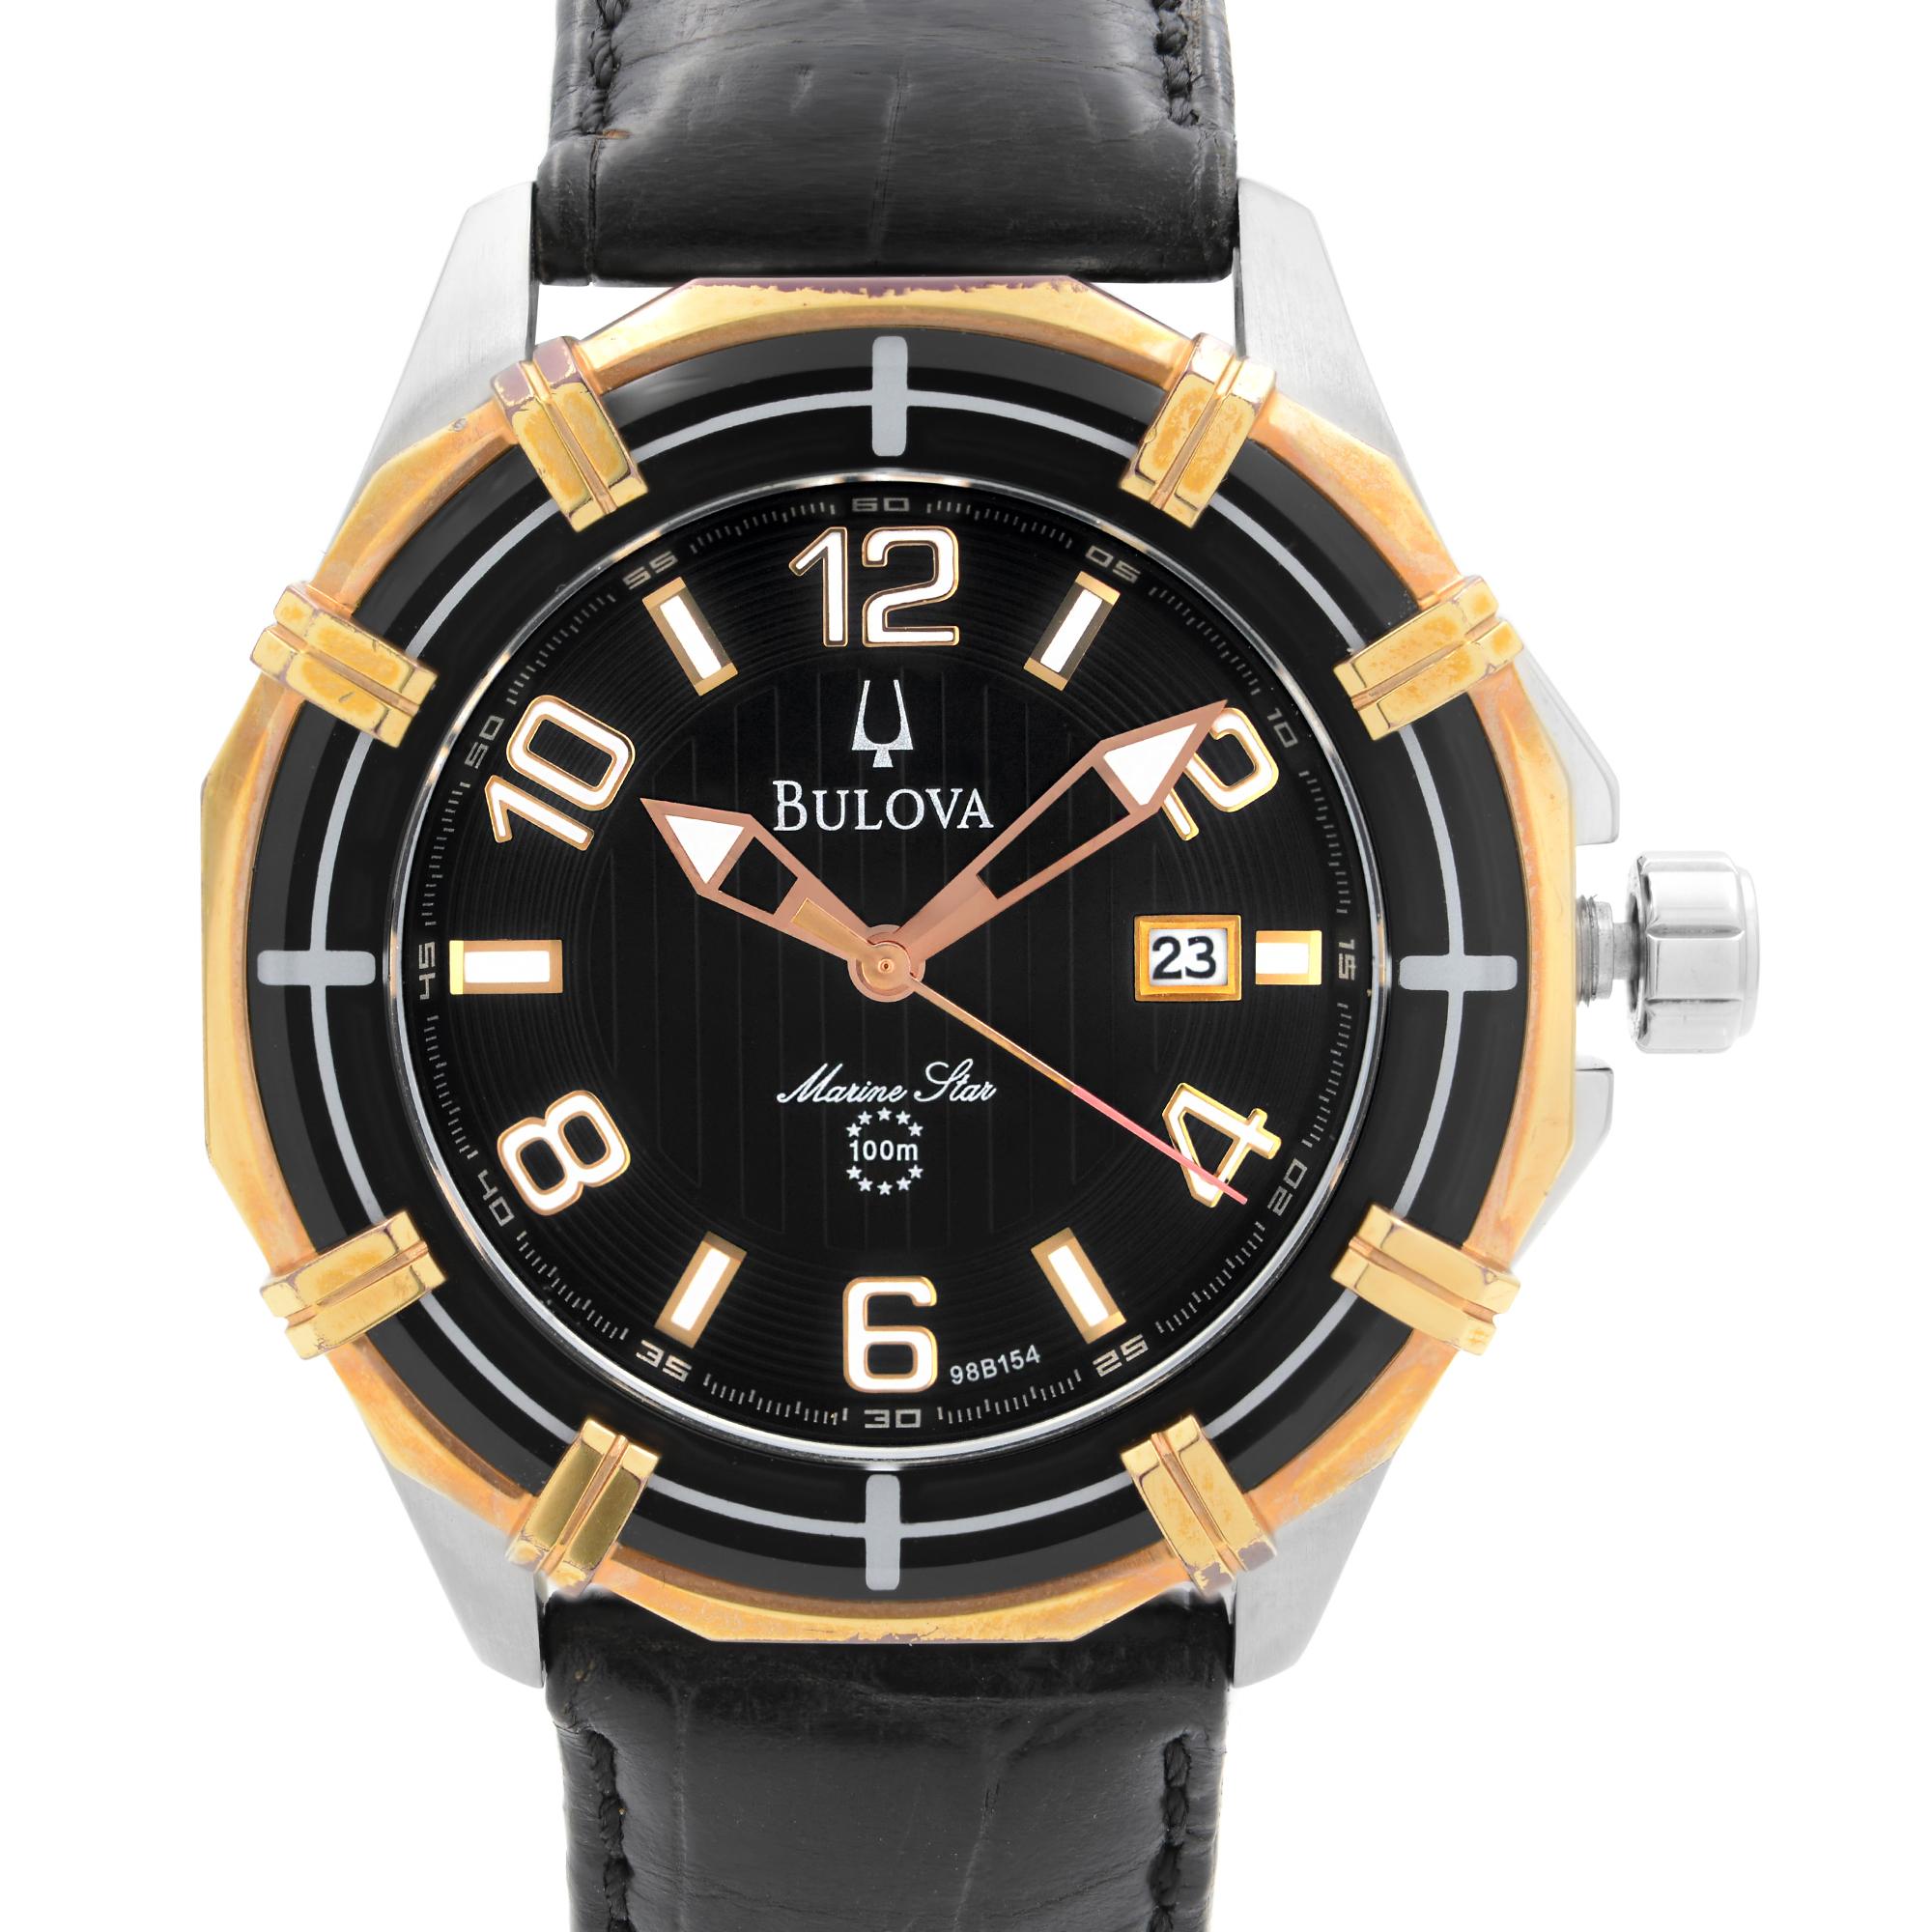 Pre-owned Bulova Marine Star Steel Black Dial Leather Strap Mens Watch 98B154. Minor Signs of Wear on Strap, Micro Scratches and Oxidation on Gold-tone Bezel and Tiny Scratches on Minute Hand. Original Box and Papers are Included. Covered by 1-year